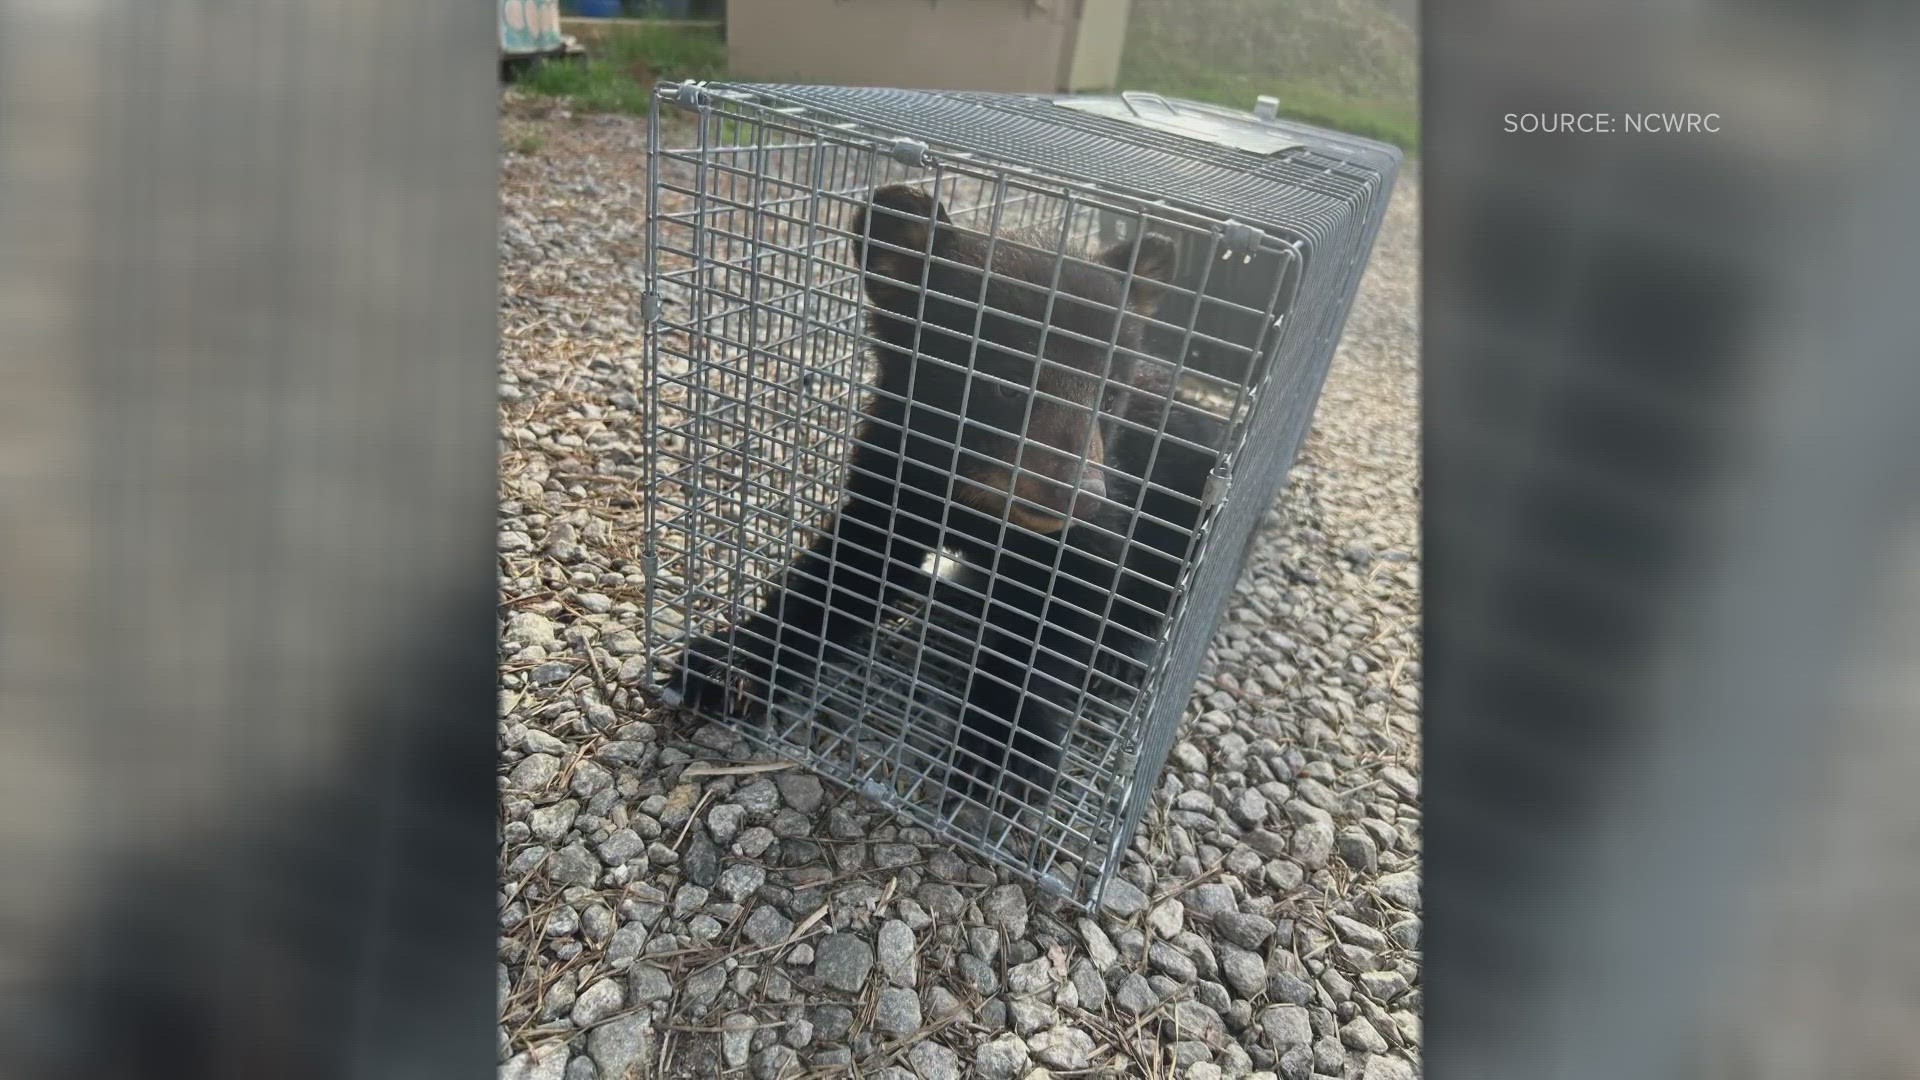 The North Carolina Wildlife Resources Commission said one of the cubs injured one of its paws. It is now at a rehab center.